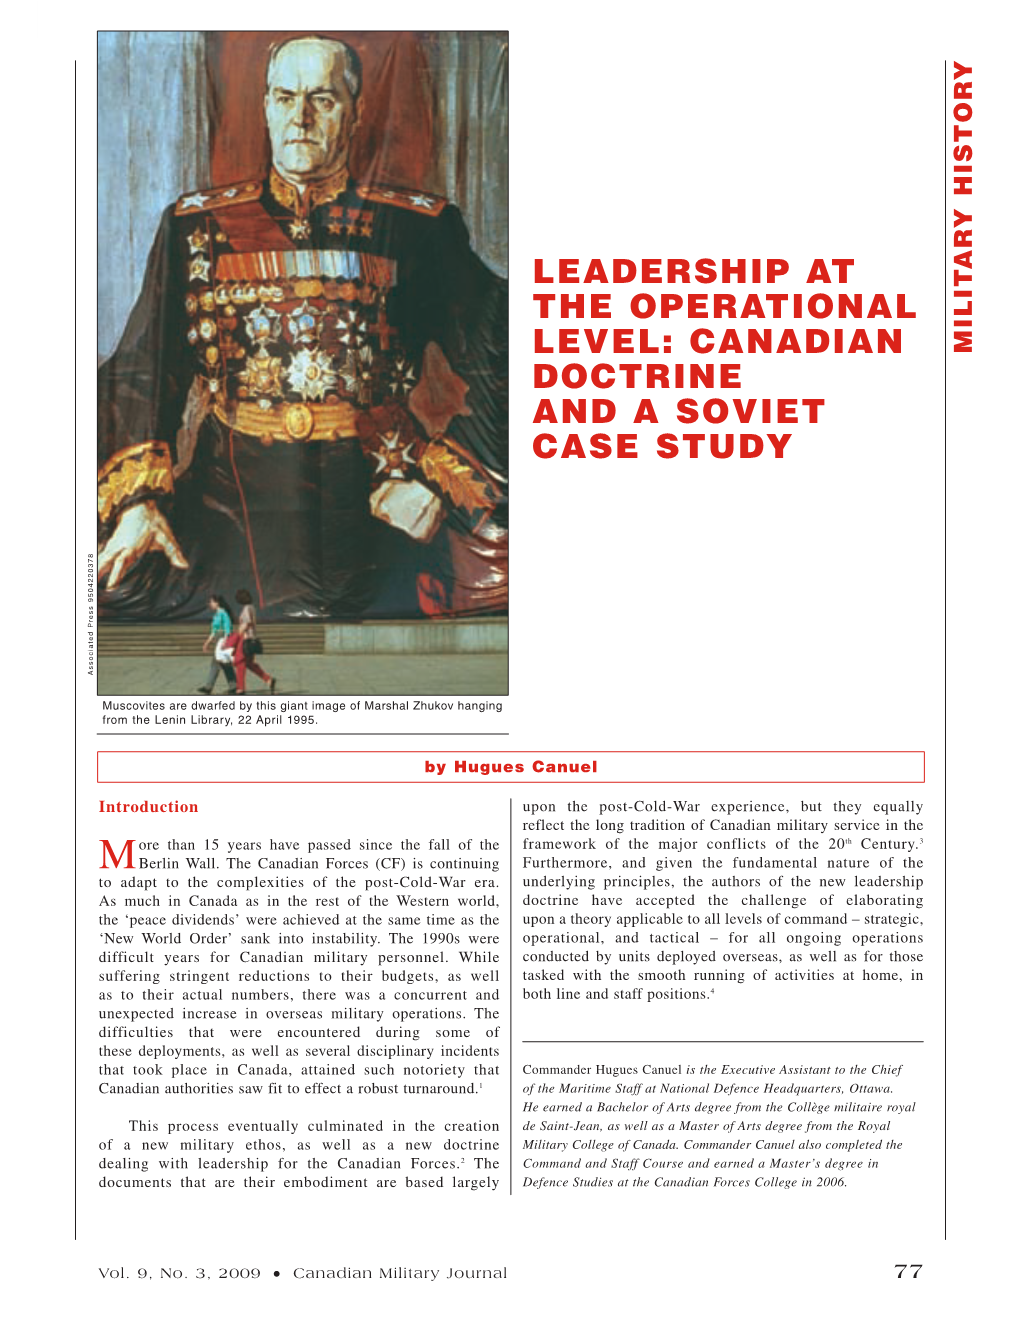 Leadership at the Operational Level: Canadian Doctrine and a Soviet